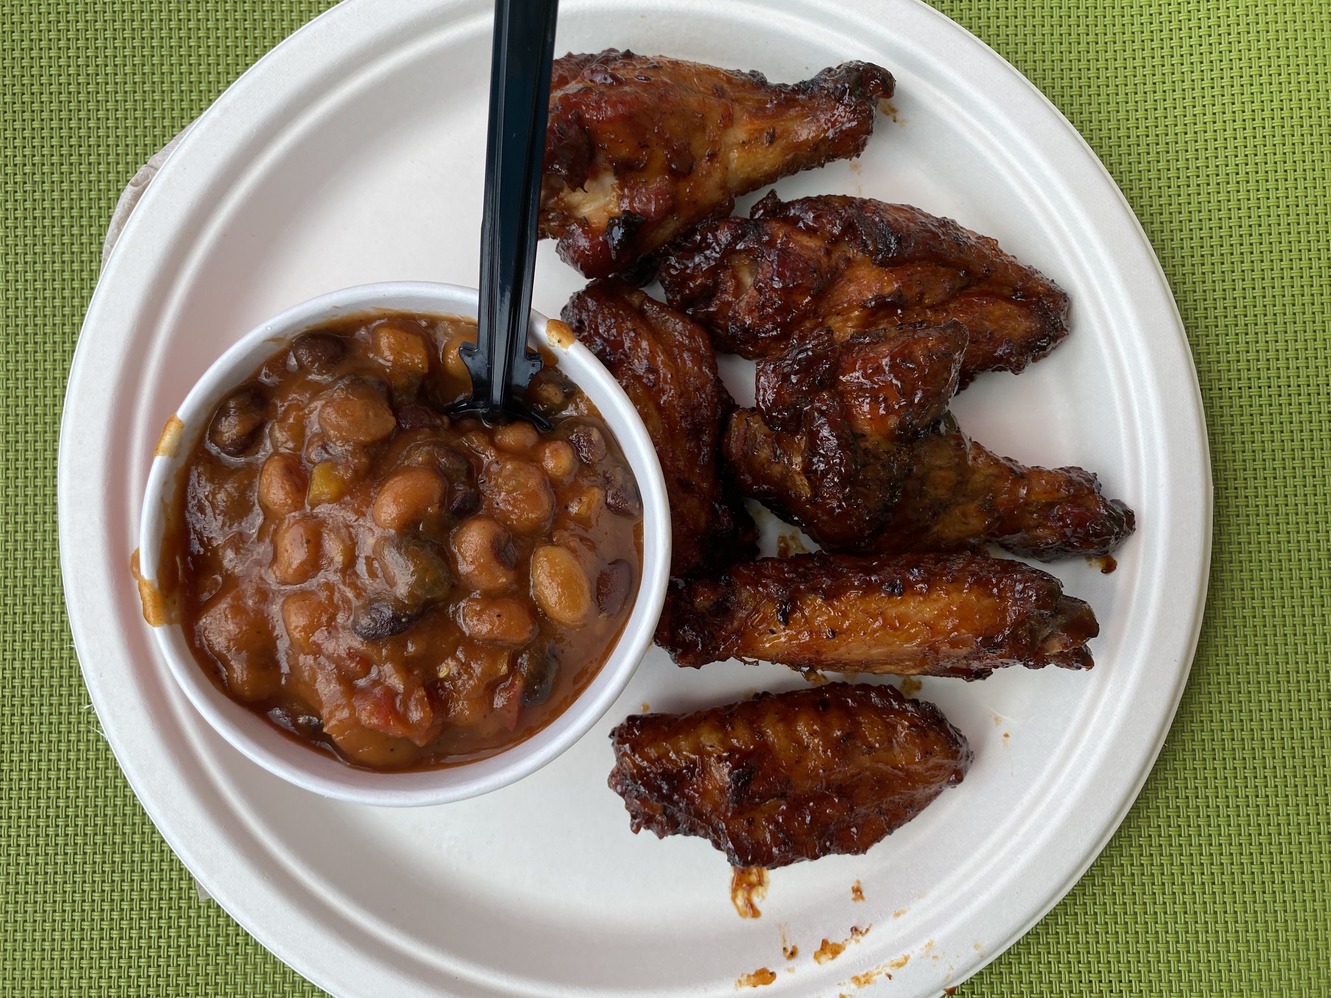 Smoked chicken wings and cowboy beans are delicious.